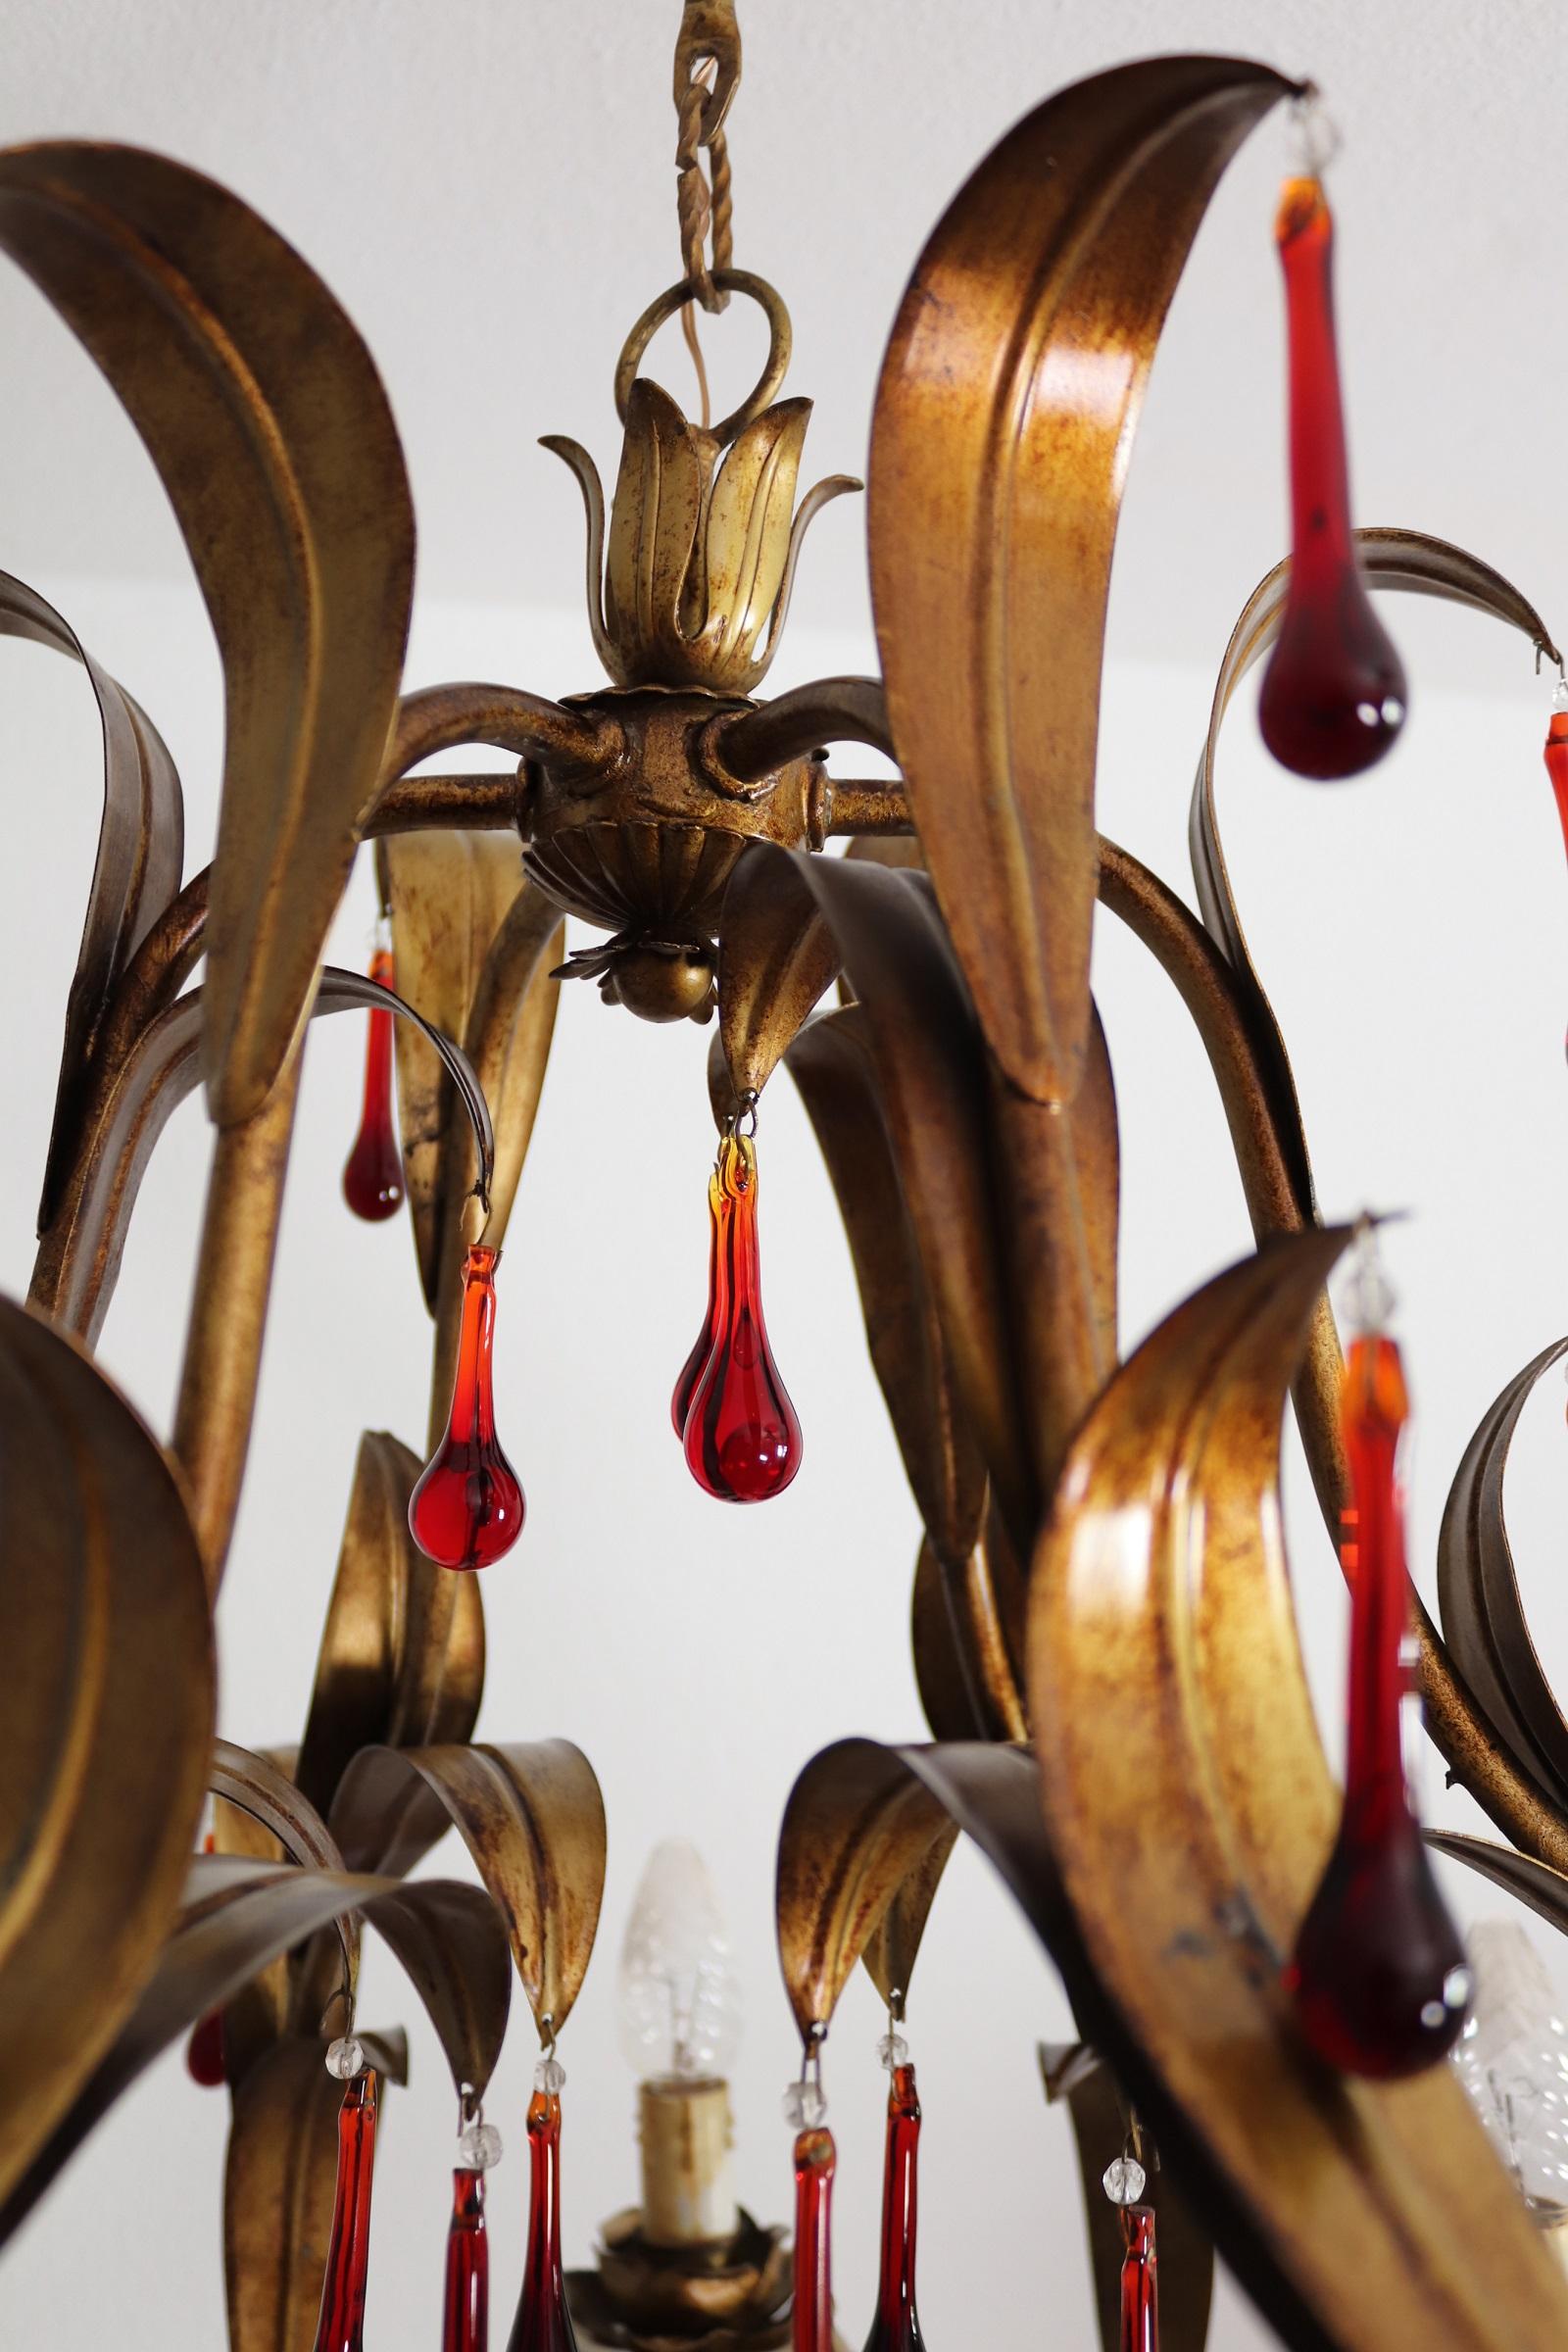 Italian Midcentury Gilt Florentine Chandelier with Red Murano Glass Drops, 1970s For Sale 6